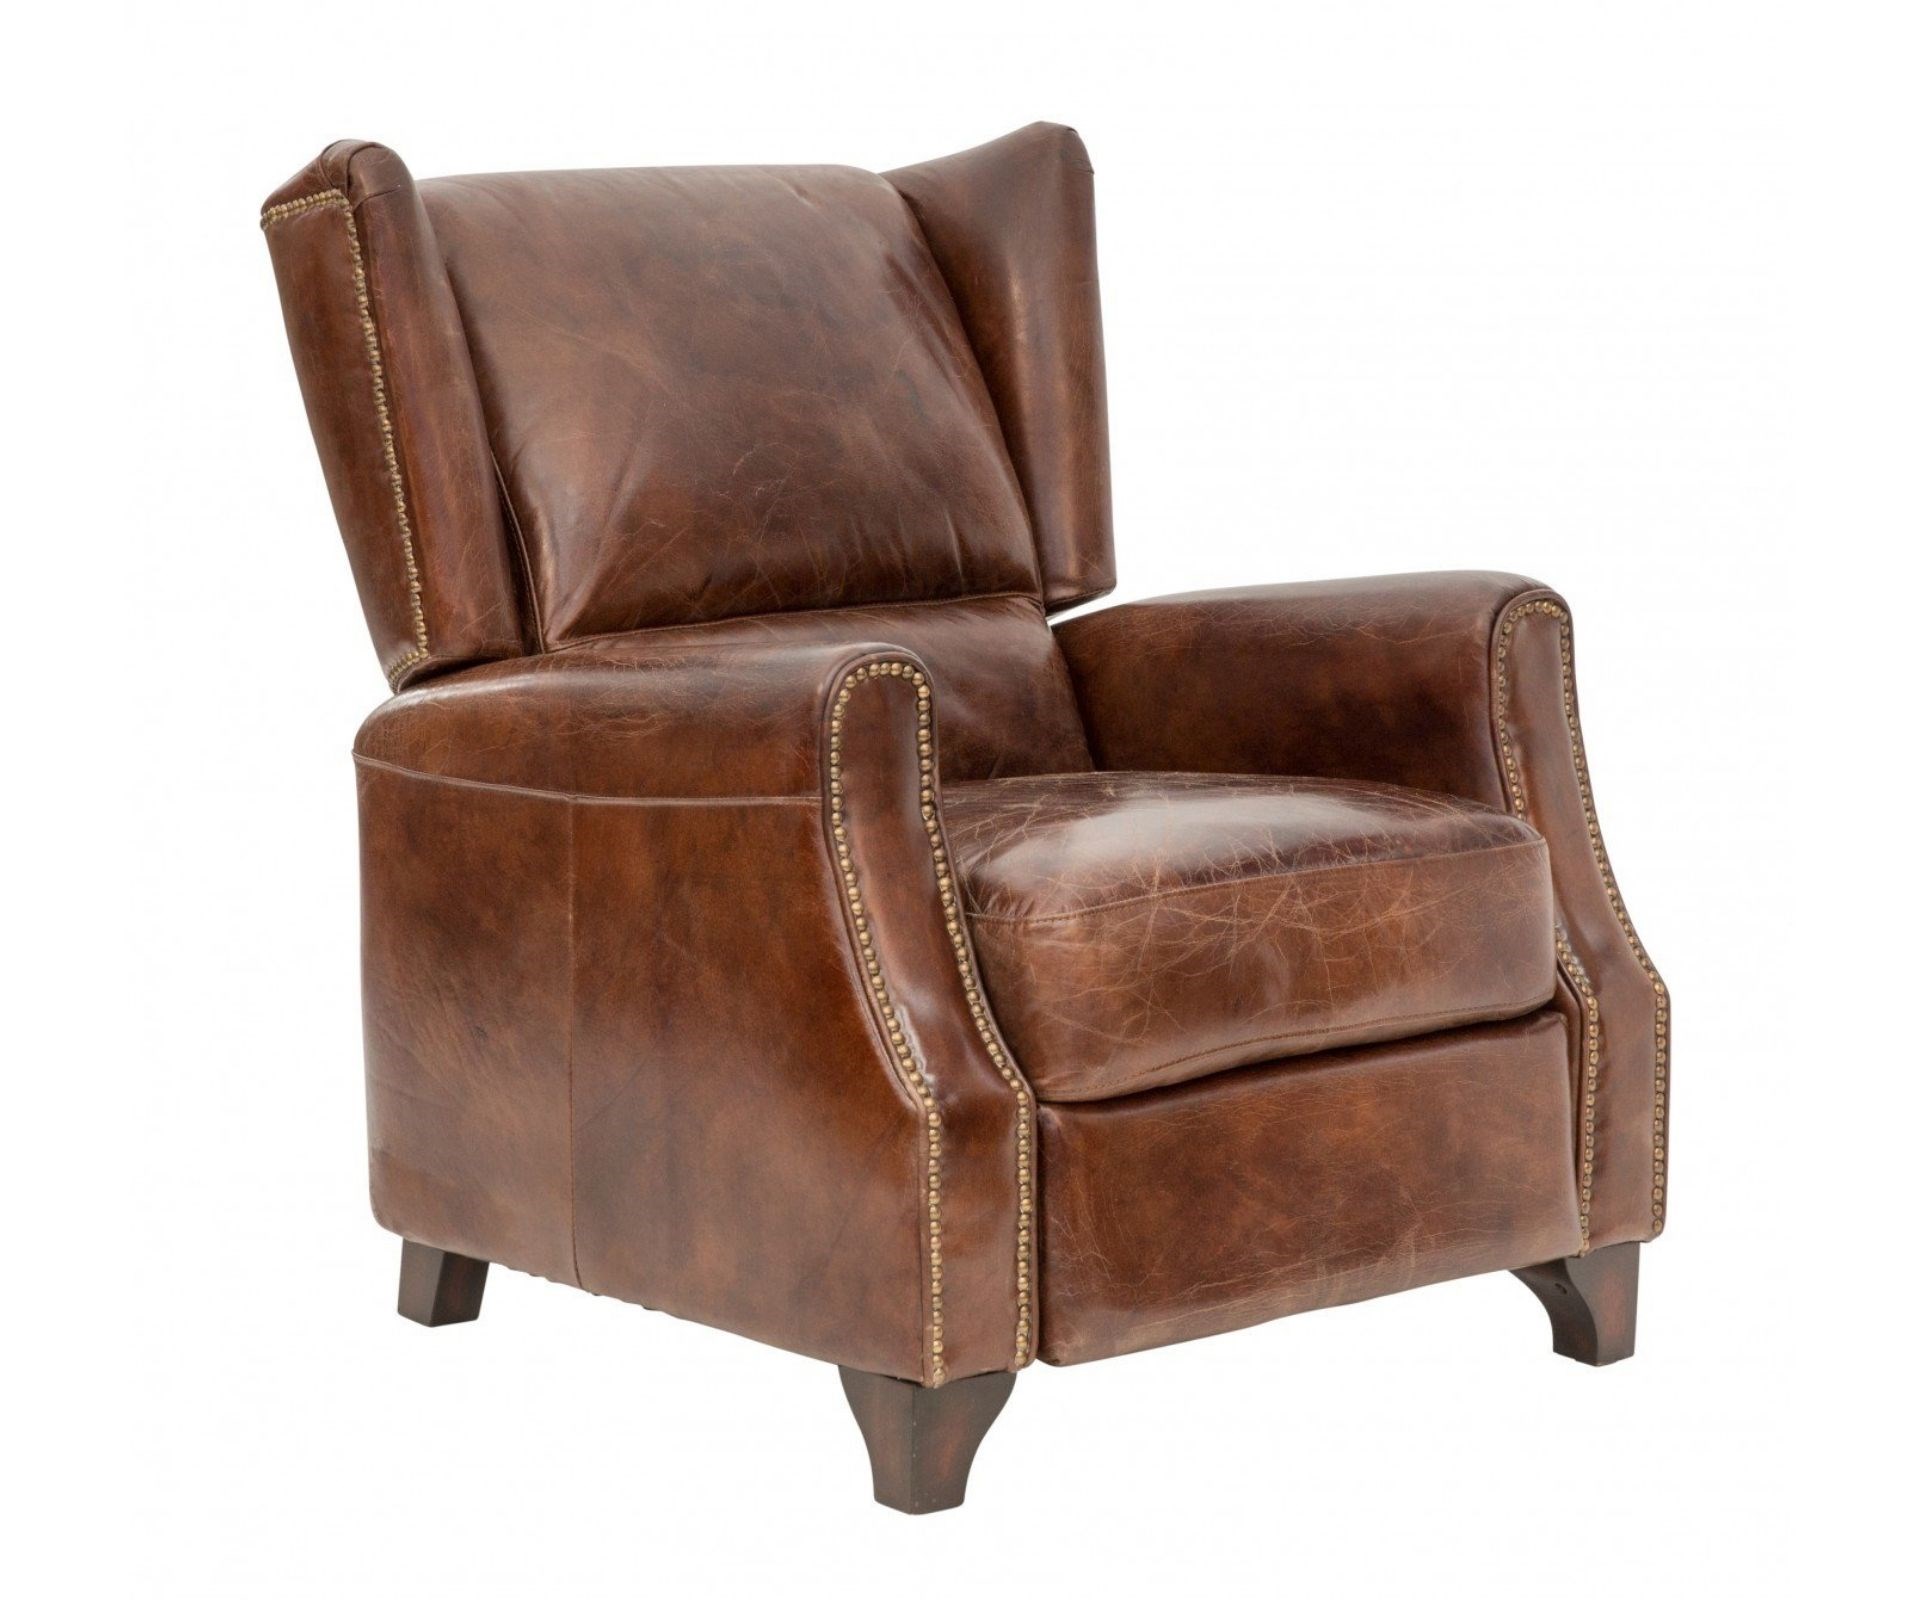 Best Cheap Armchairs : Amazon.com - Leather Recliner Chairs Set of 2